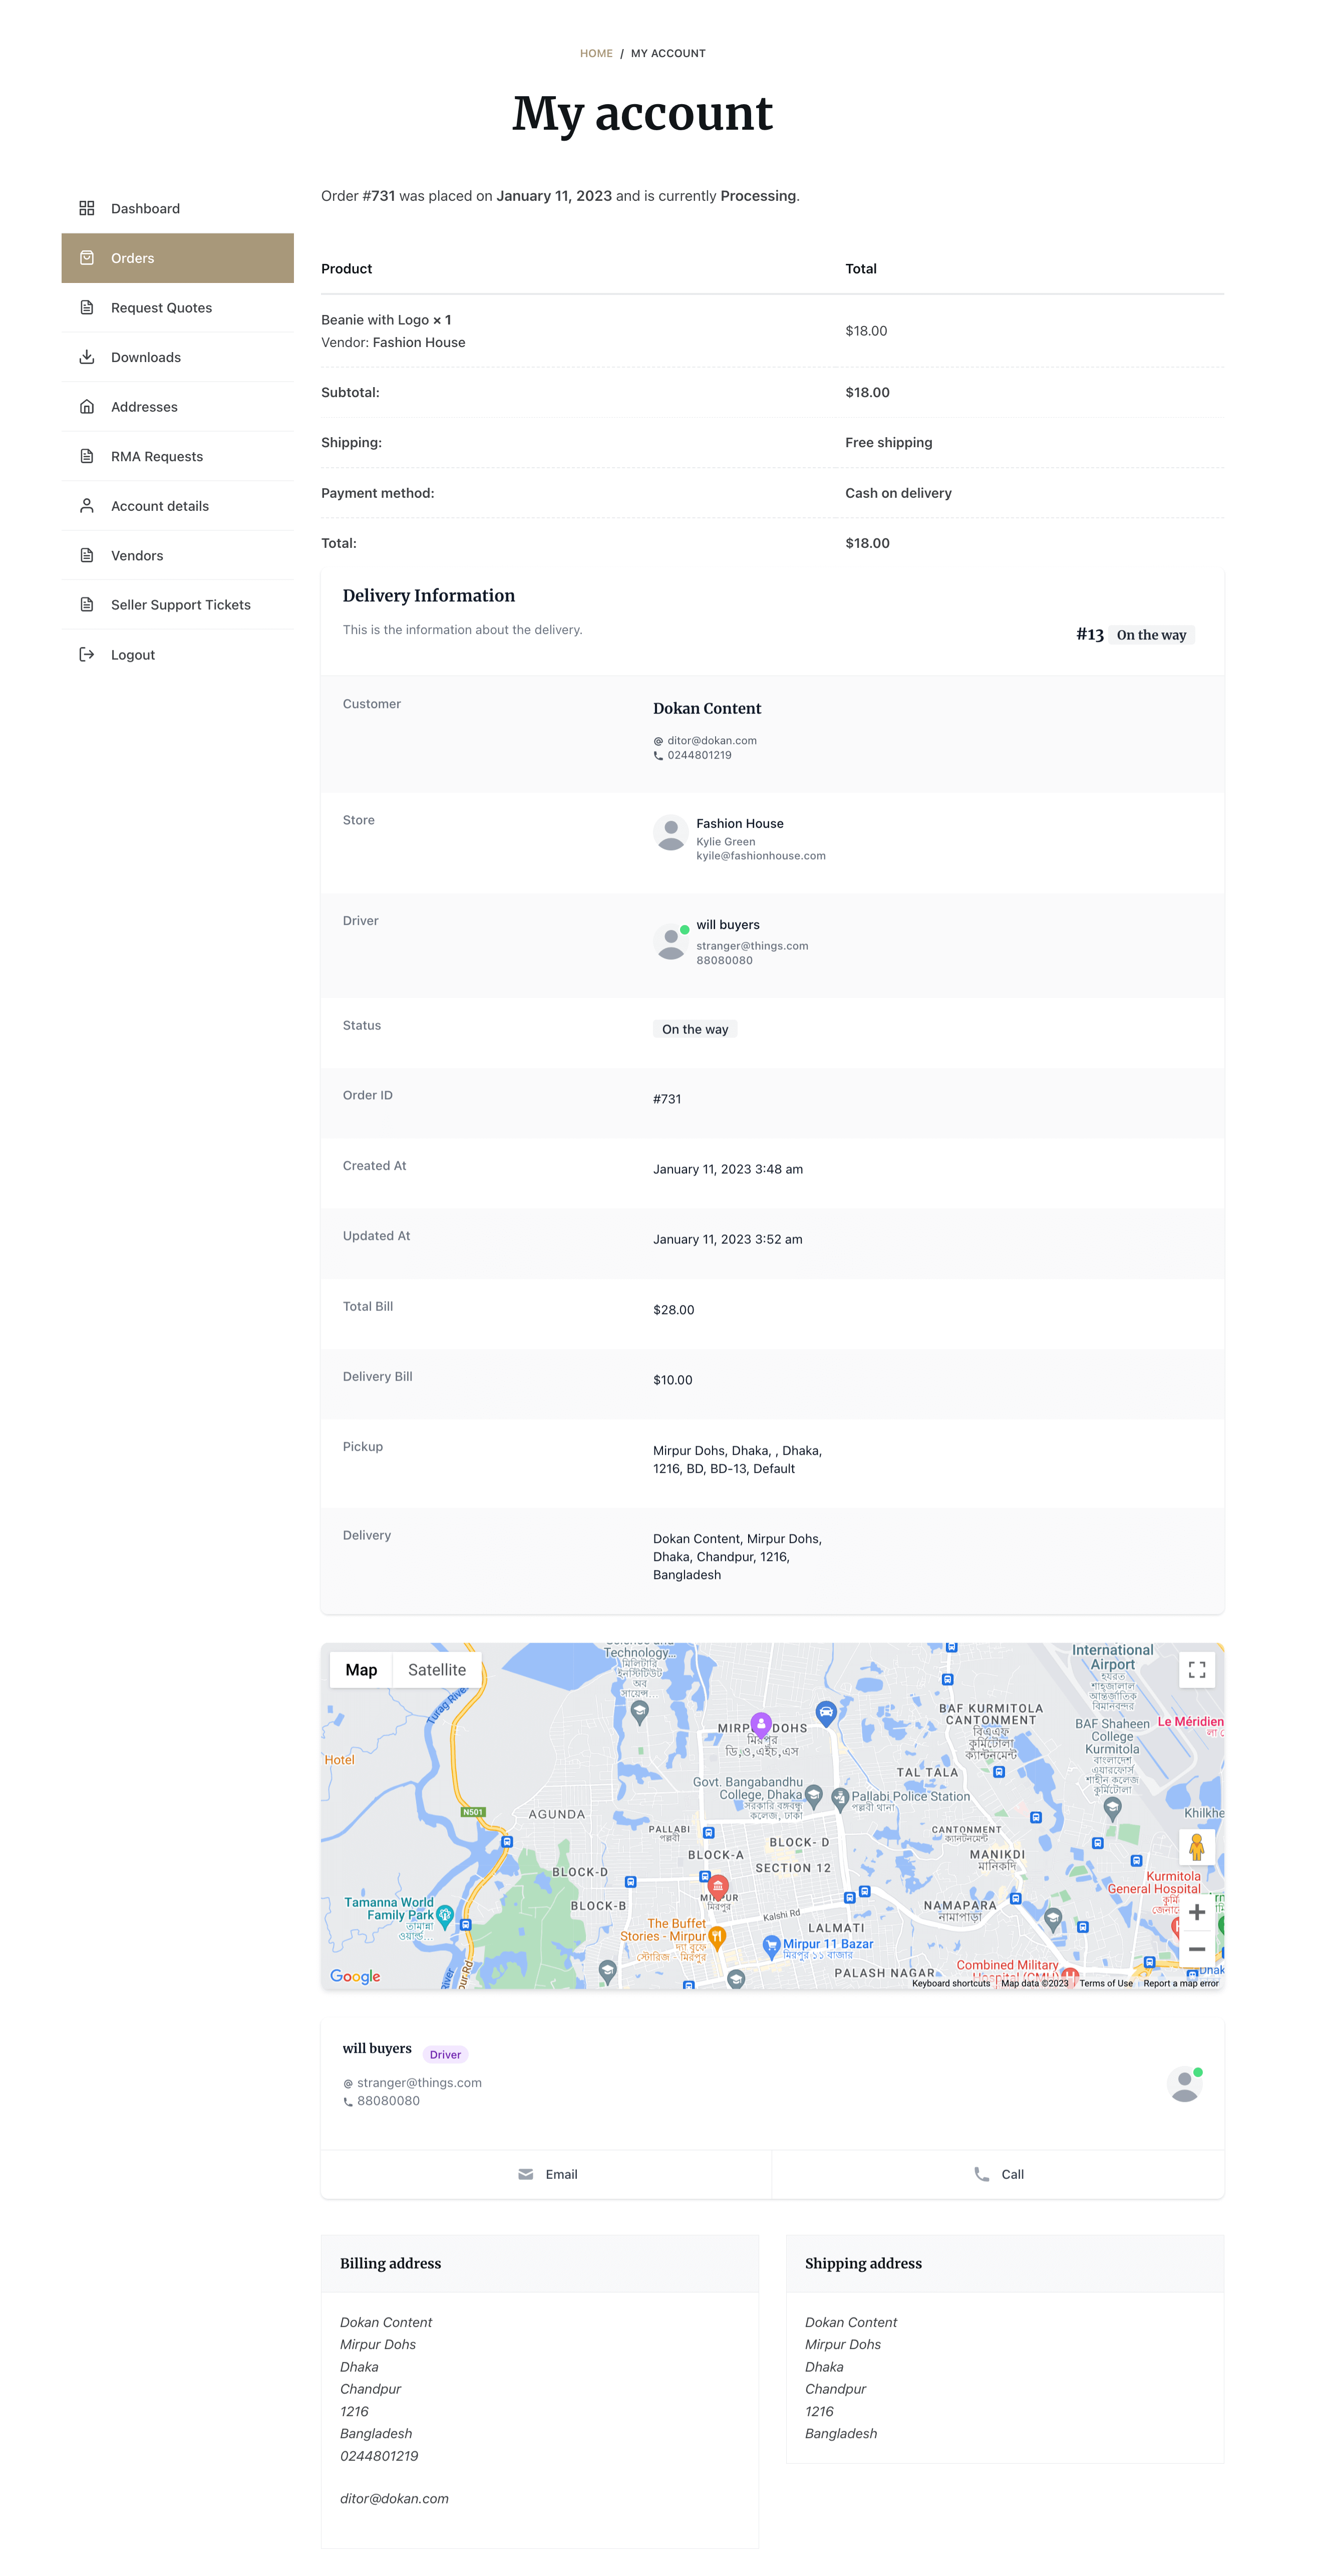 This image shows Customer screen without shipment tracking